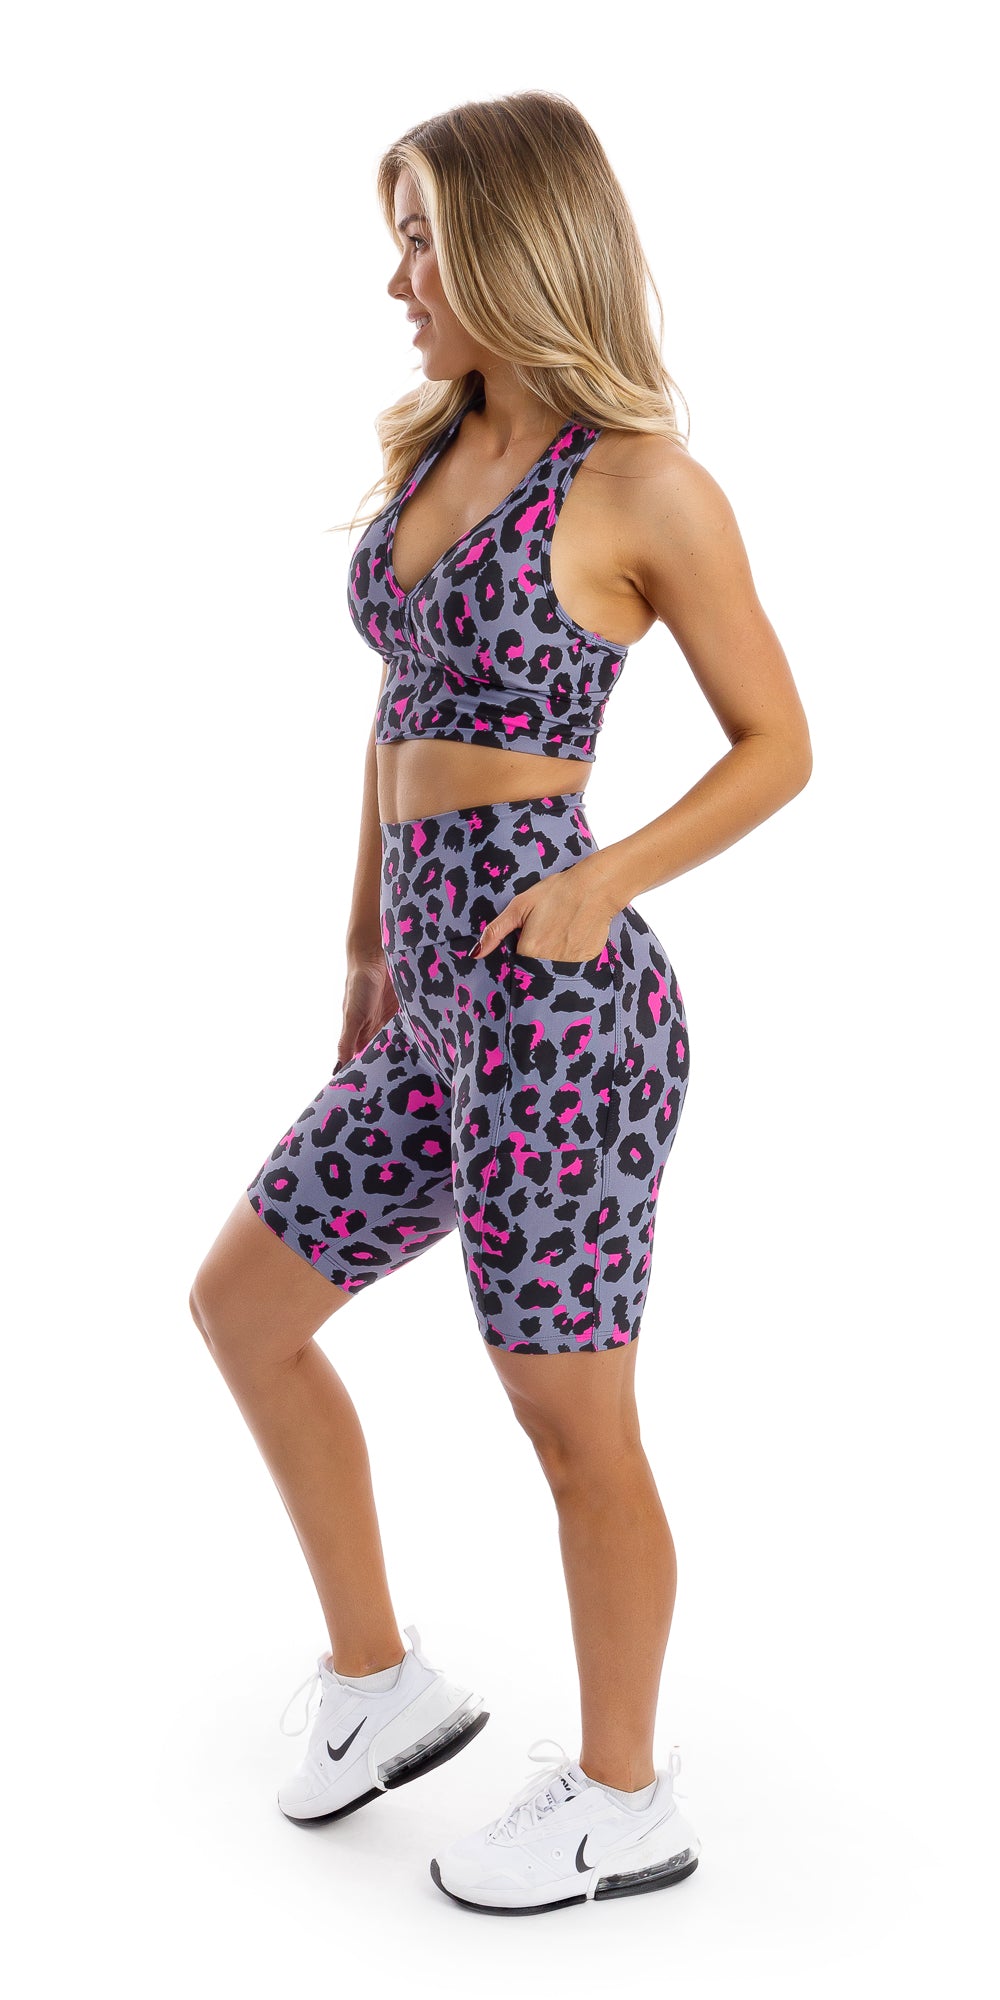 Full body side view of girl in animal print Pink Leopard Eco Biker Shorts with Pockets and matching bra putting bent knee forward and one hand in pocket